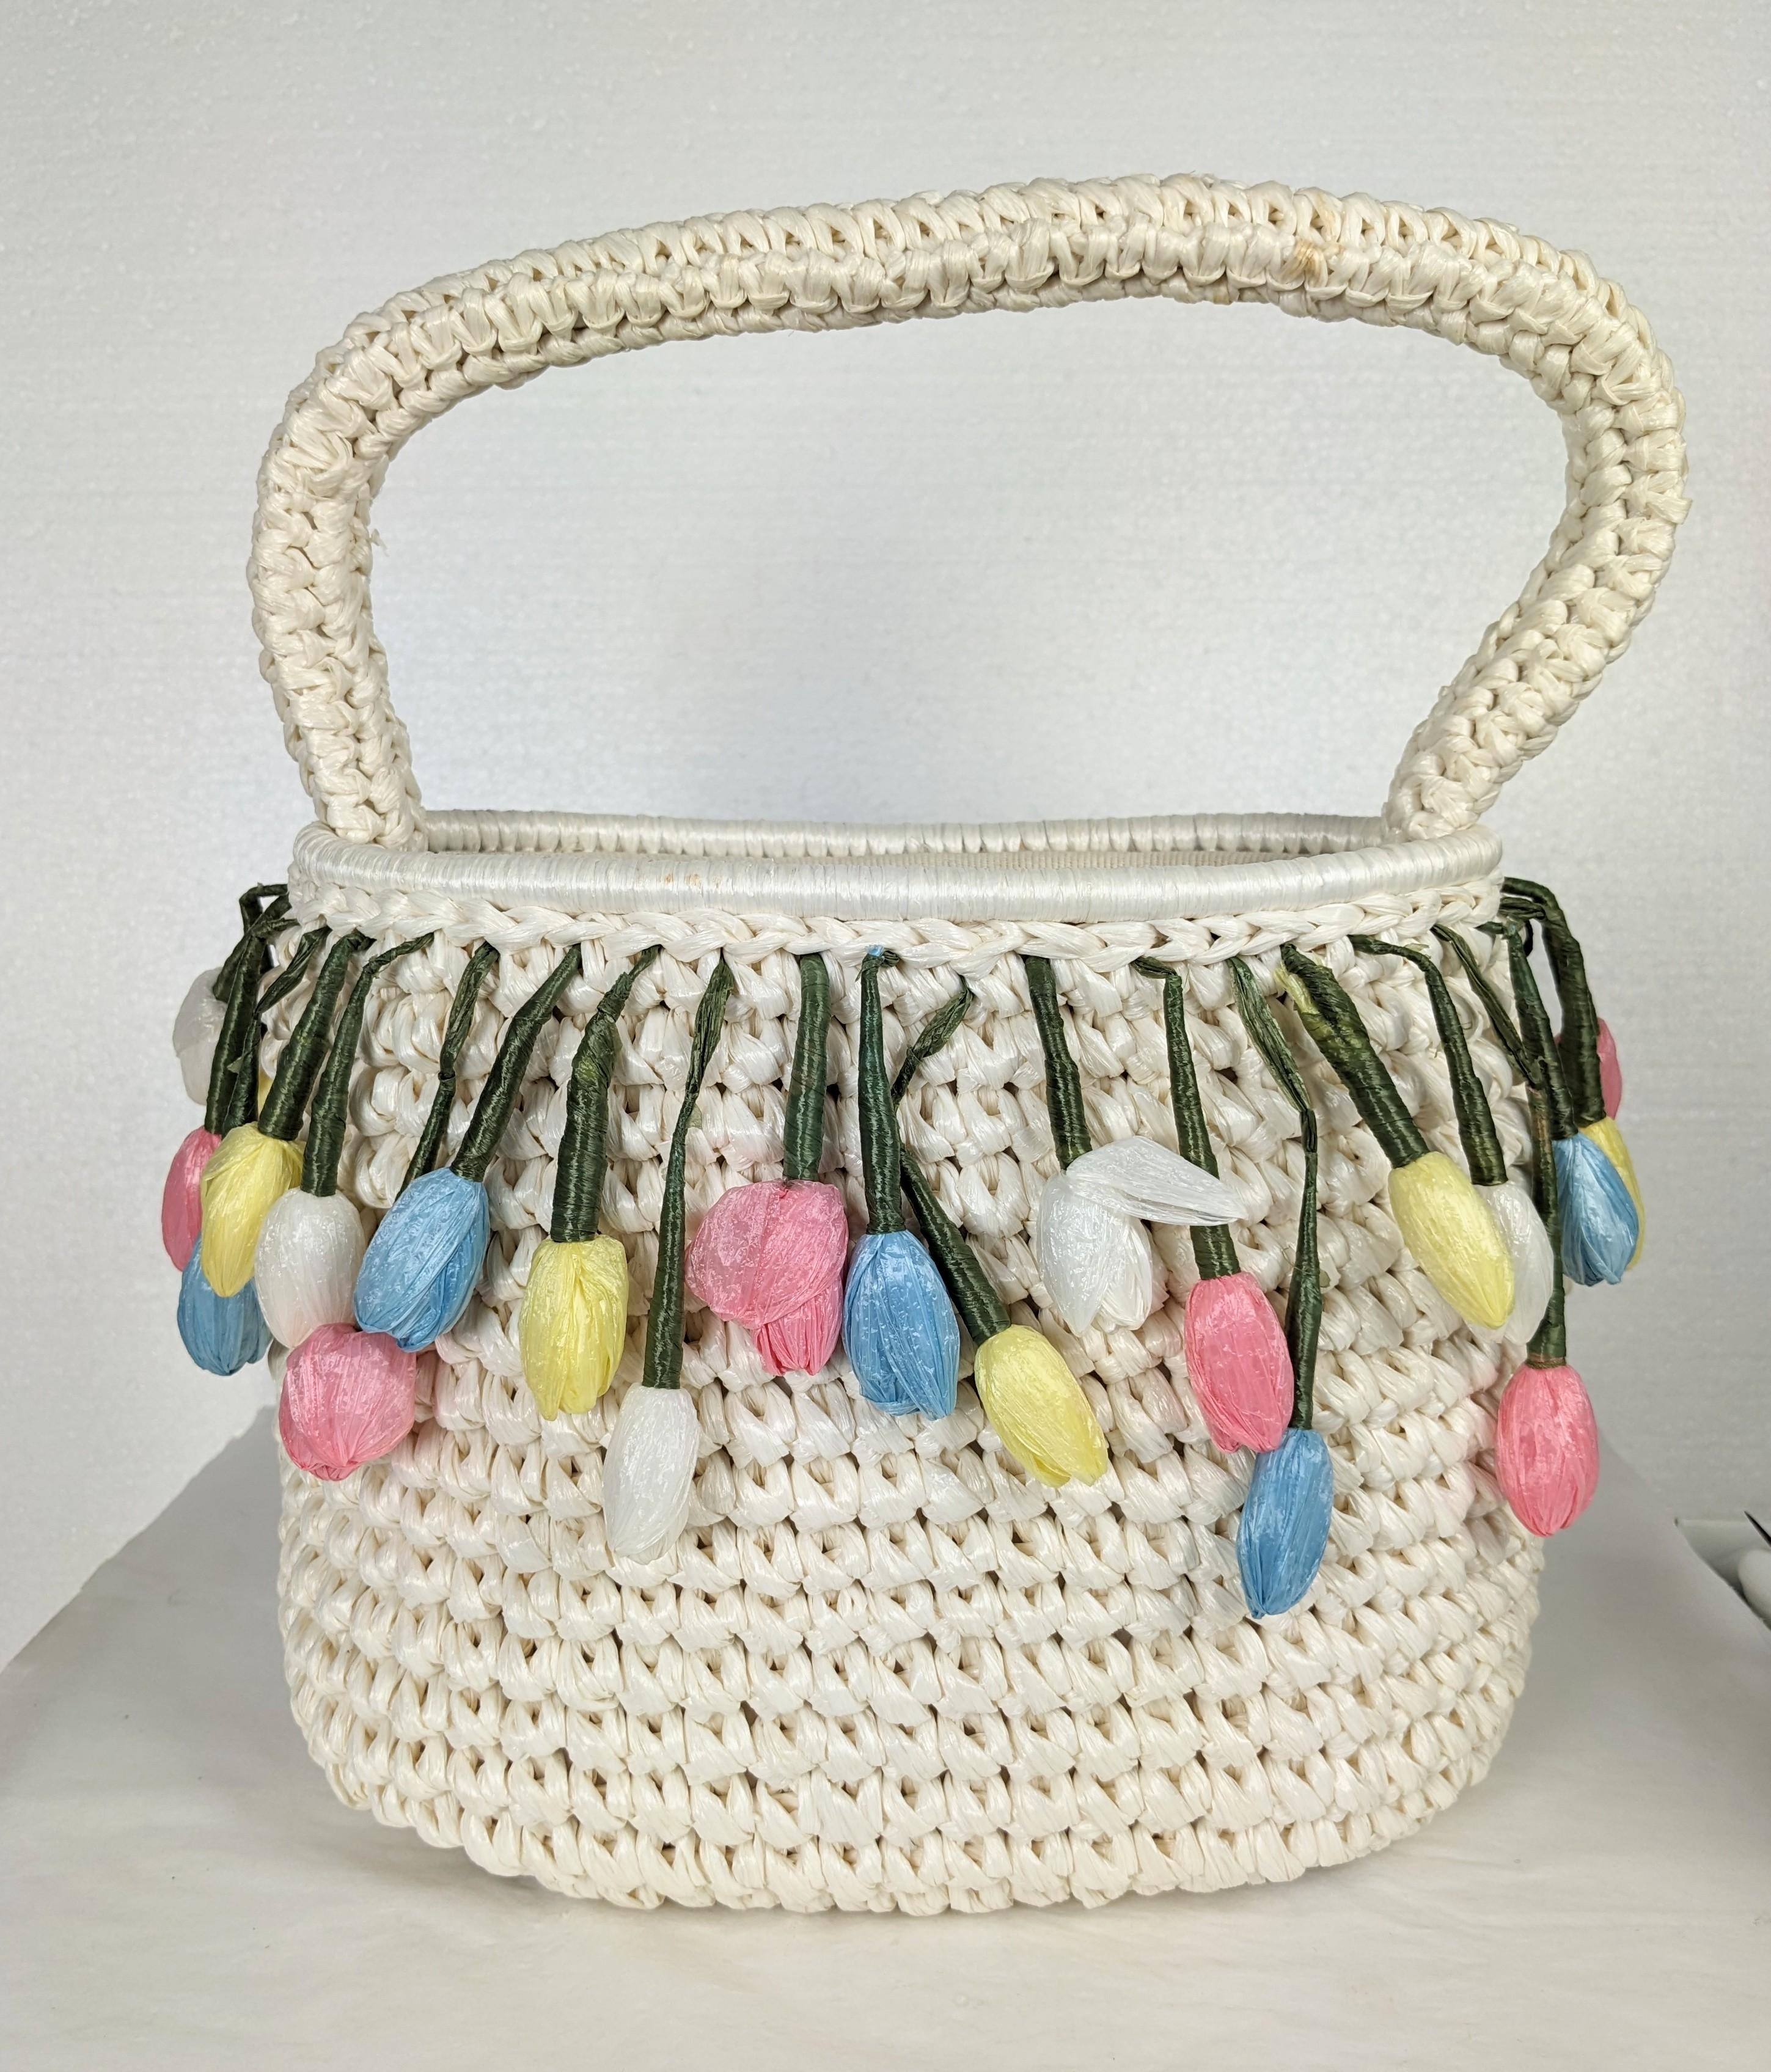 Charming Raffia and Straw Flower Bud Purse from the 1960's. Hand made in Japan for export, this bag appears unused. The pastel dangling buds are all hand made with raffia straw along the top edge of the open purse. The body is hand crochet of raffia